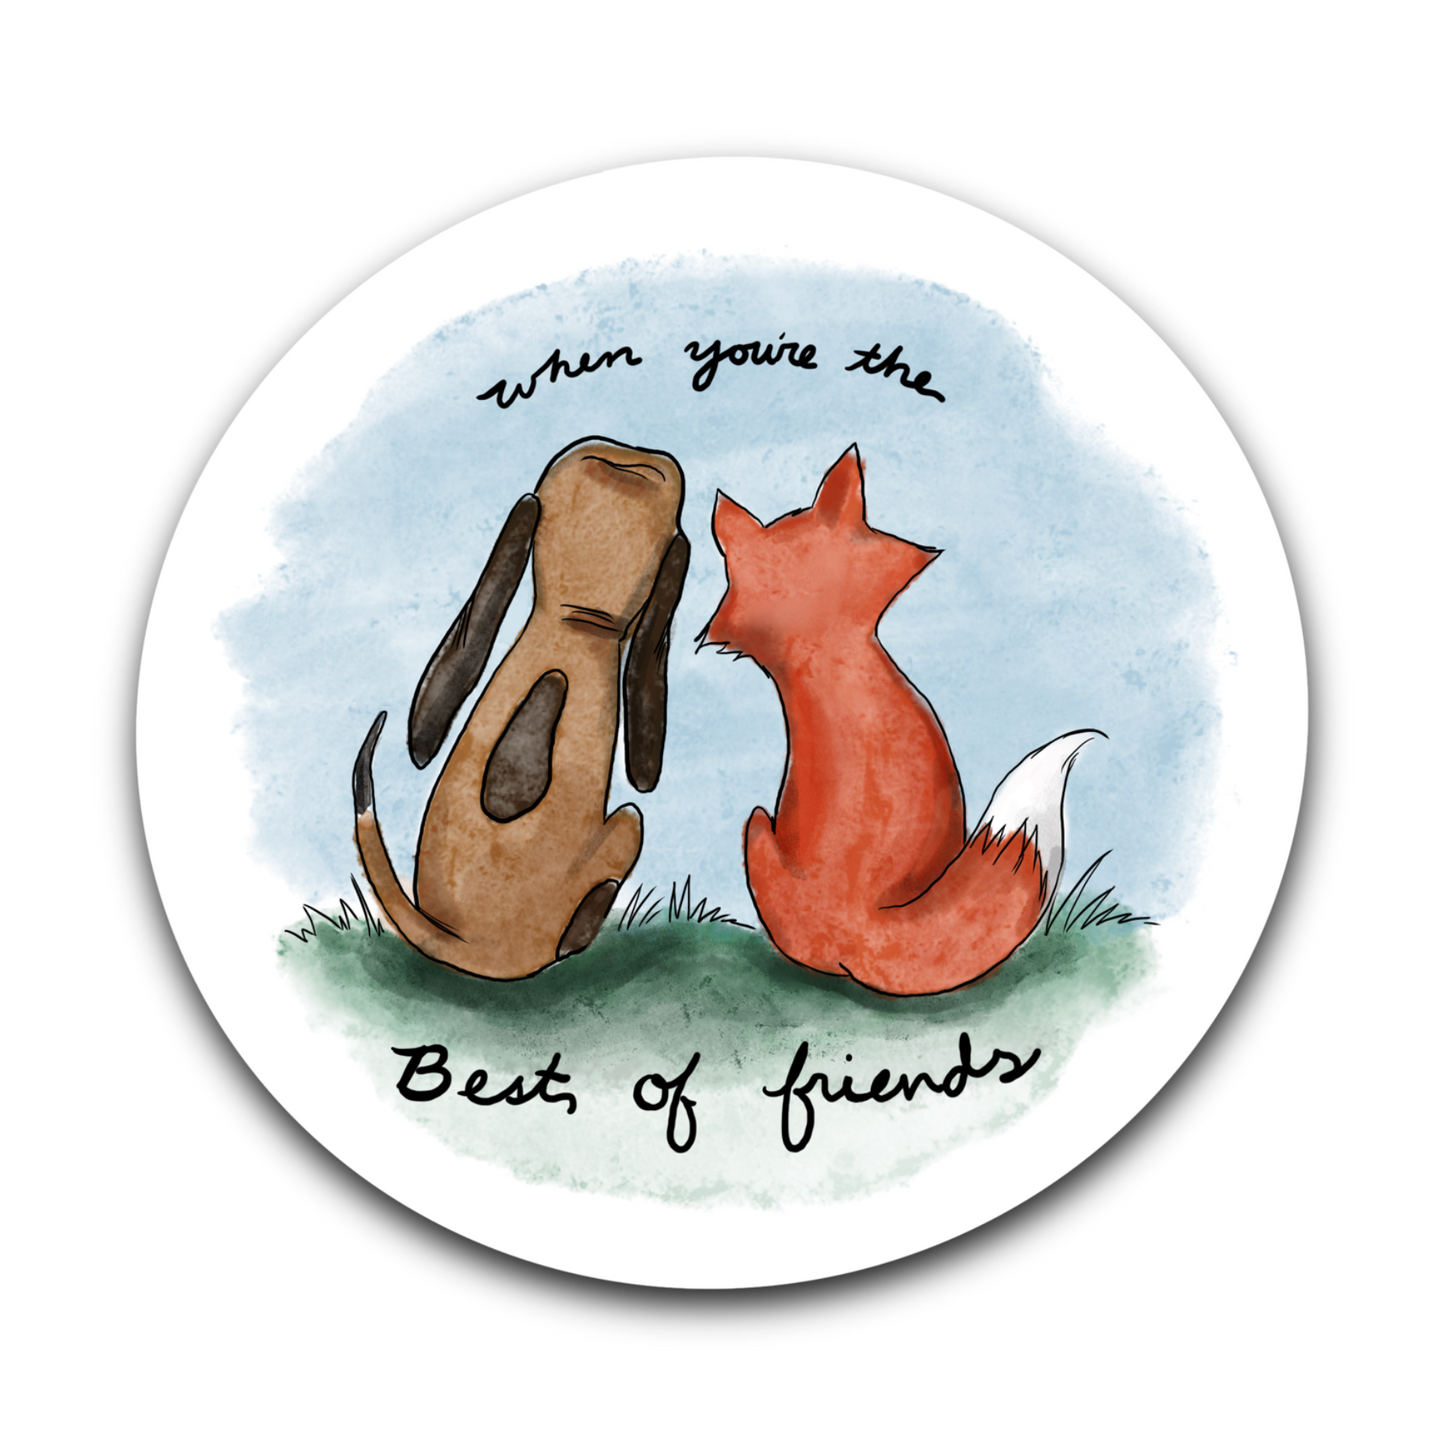 Two Friends - When You're the Best of Friends- Fox and Hound inspired - Bubble free sticker I14